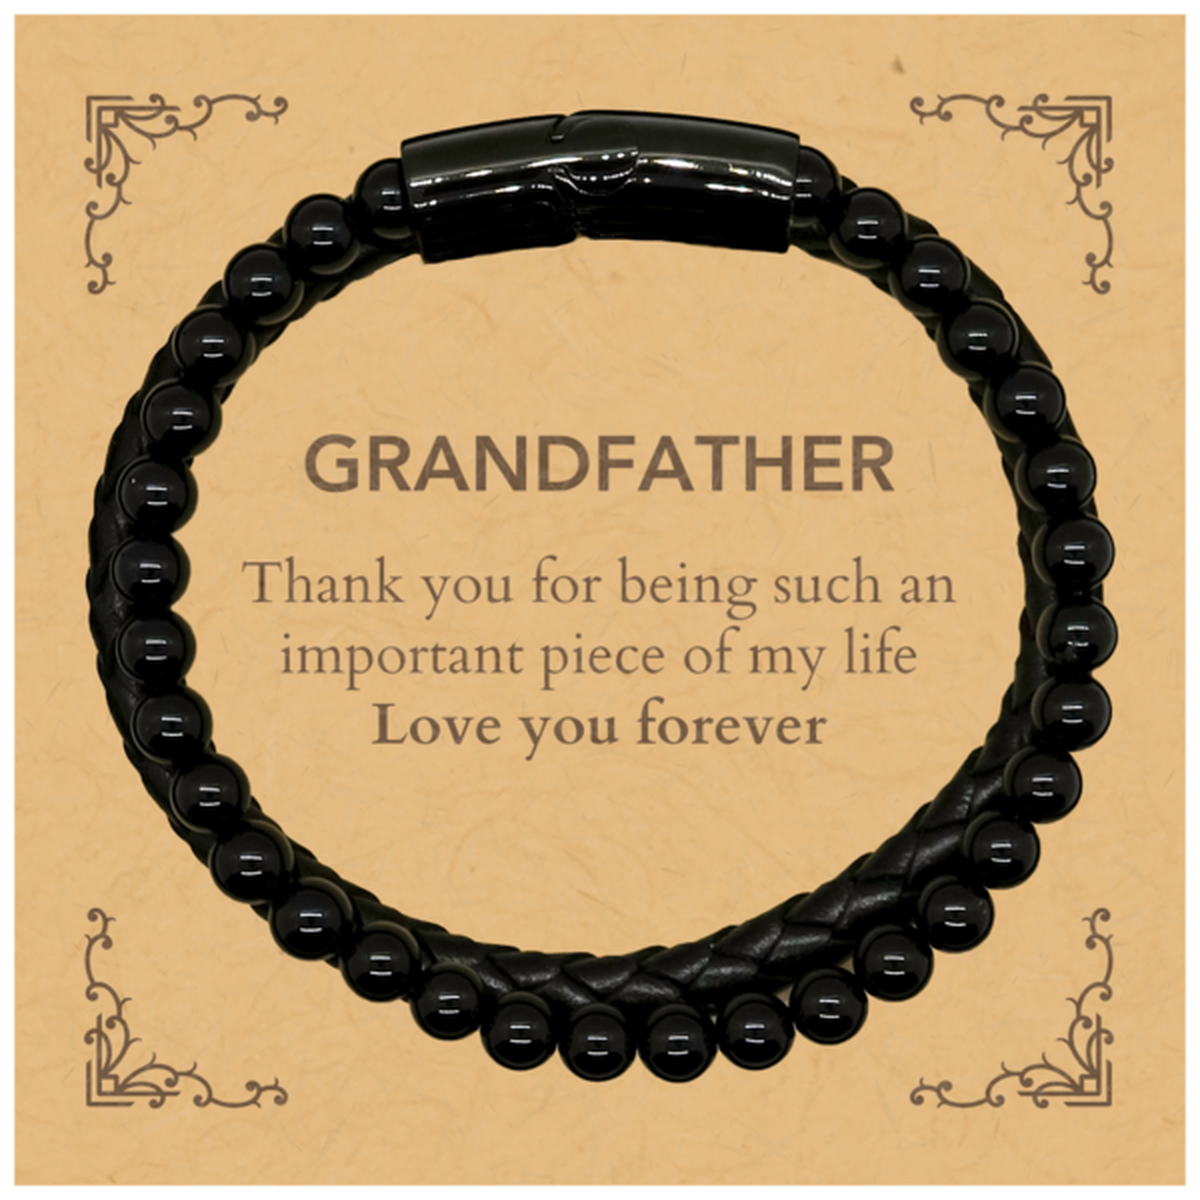 Appropriate Grandfather Stone Leather Bracelets Epic Birthday Gifts for Grandfather Thank you for being such an important piece of my life Grandfather Christmas Mothers Fathers Day